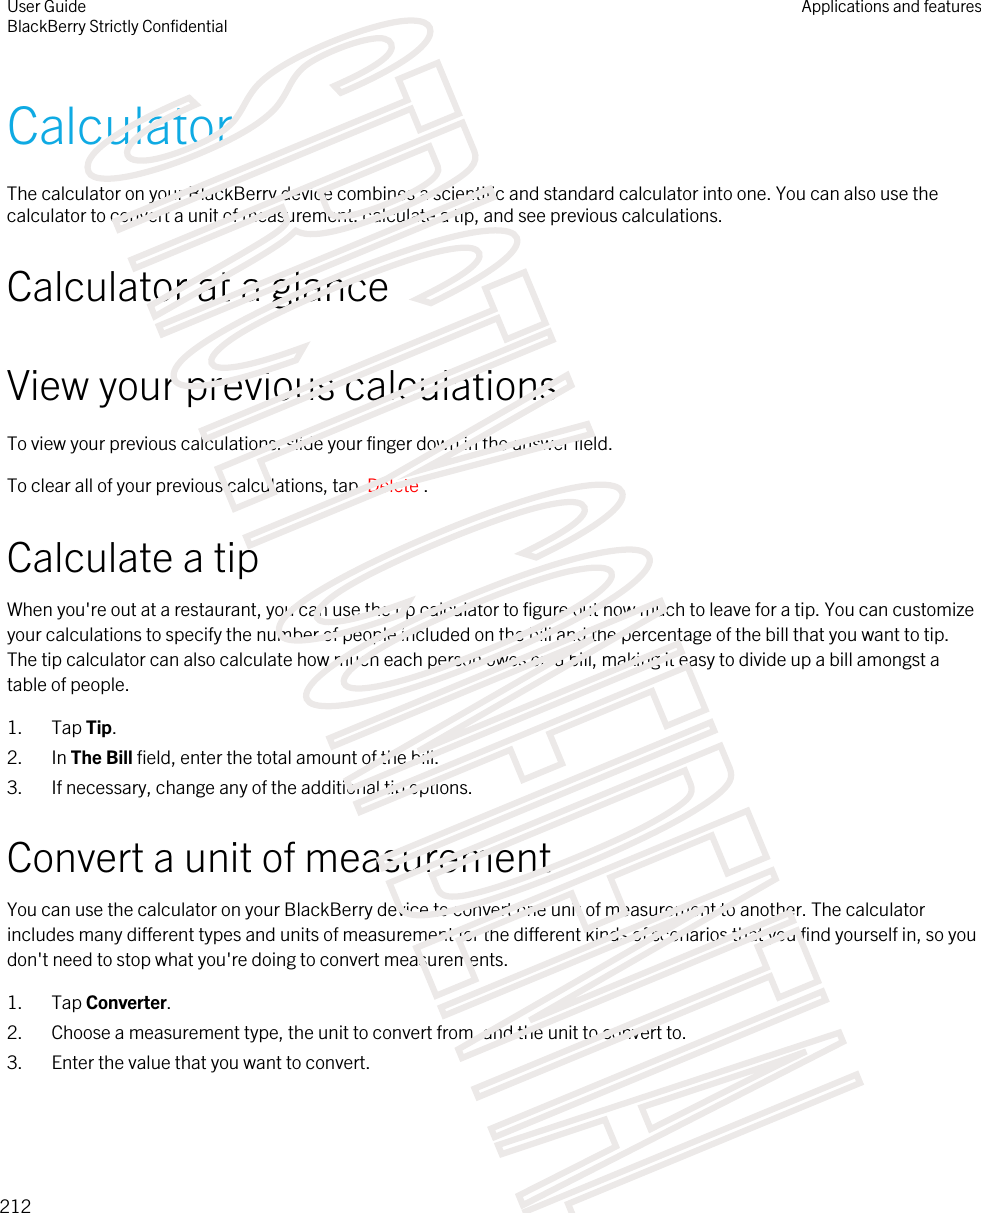 CalculatorThe calculator on your BlackBerry device combines a scientific and standard calculator into one. You can also use the calculator to convert a unit of measurement, calculate a tip, and see previous calculations.Calculator at a glanceView your previous calculationsTo view your previous calculations, slide your finger down in the answer field.To clear all of your previous calculations, tap  Delete .Calculate a tipWhen you&apos;re out at a restaurant, you can use the tip calculator to figure out how much to leave for a tip. You can customize your calculations to specify the number of people included on the bill and the percentage of the bill that you want to tip. The tip calculator can also calculate how much each person owes on a bill, making it easy to divide up a bill amongst a table of people.1. Tap Tip.2. In The Bill field, enter the total amount of the bill.3. If necessary, change any of the additional tip options.Convert a unit of measurementYou can use the calculator on your BlackBerry device to convert one unit of measurement to another. The calculator includes many different types and units of measurement for the different kinds of scenarios that you find yourself in, so you don&apos;t need to stop what you&apos;re doing to convert measurements.1. Tap Converter.2. Choose a measurement type, the unit to convert from, and the unit to convert to.3. Enter the value that you want to convert.User GuideBlackBerry Strictly ConfidentialApplications and features212STRICTLY CONFIDENTIAL